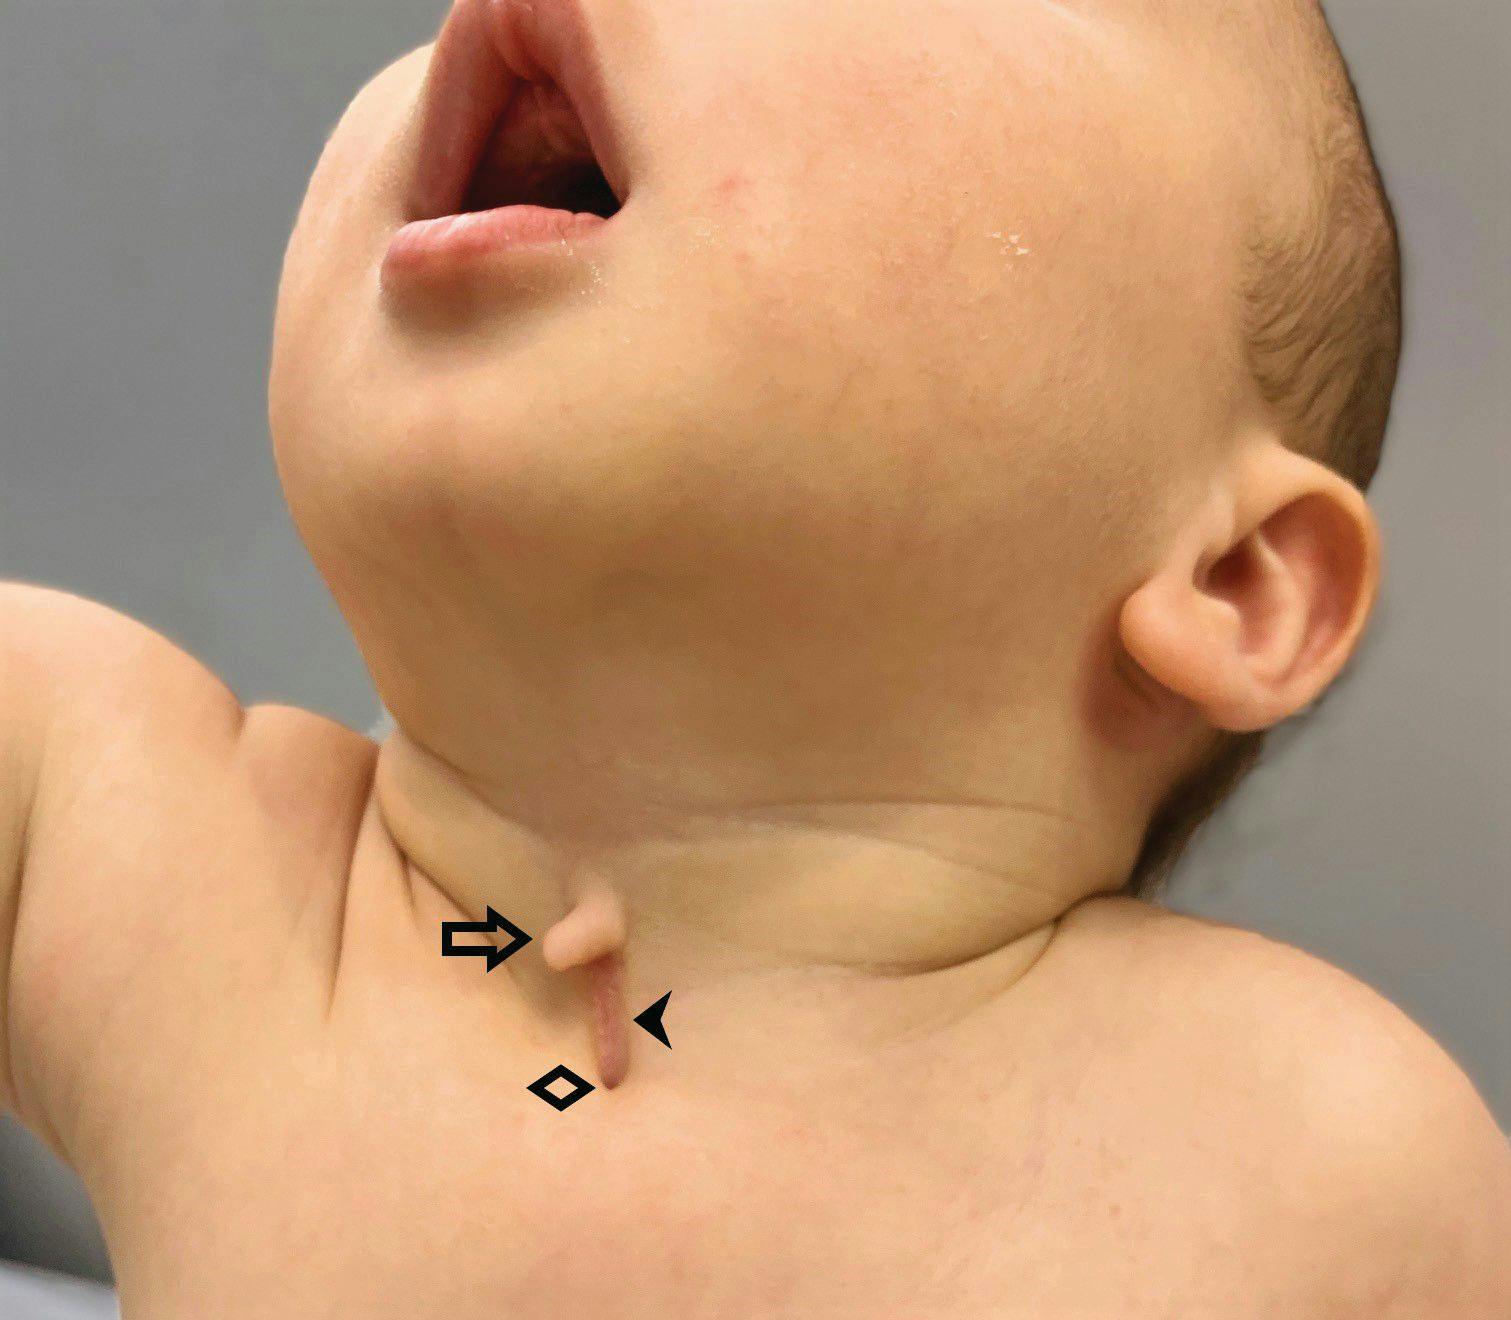 Newborn with midline neck lesion | Image Credit: Author provided